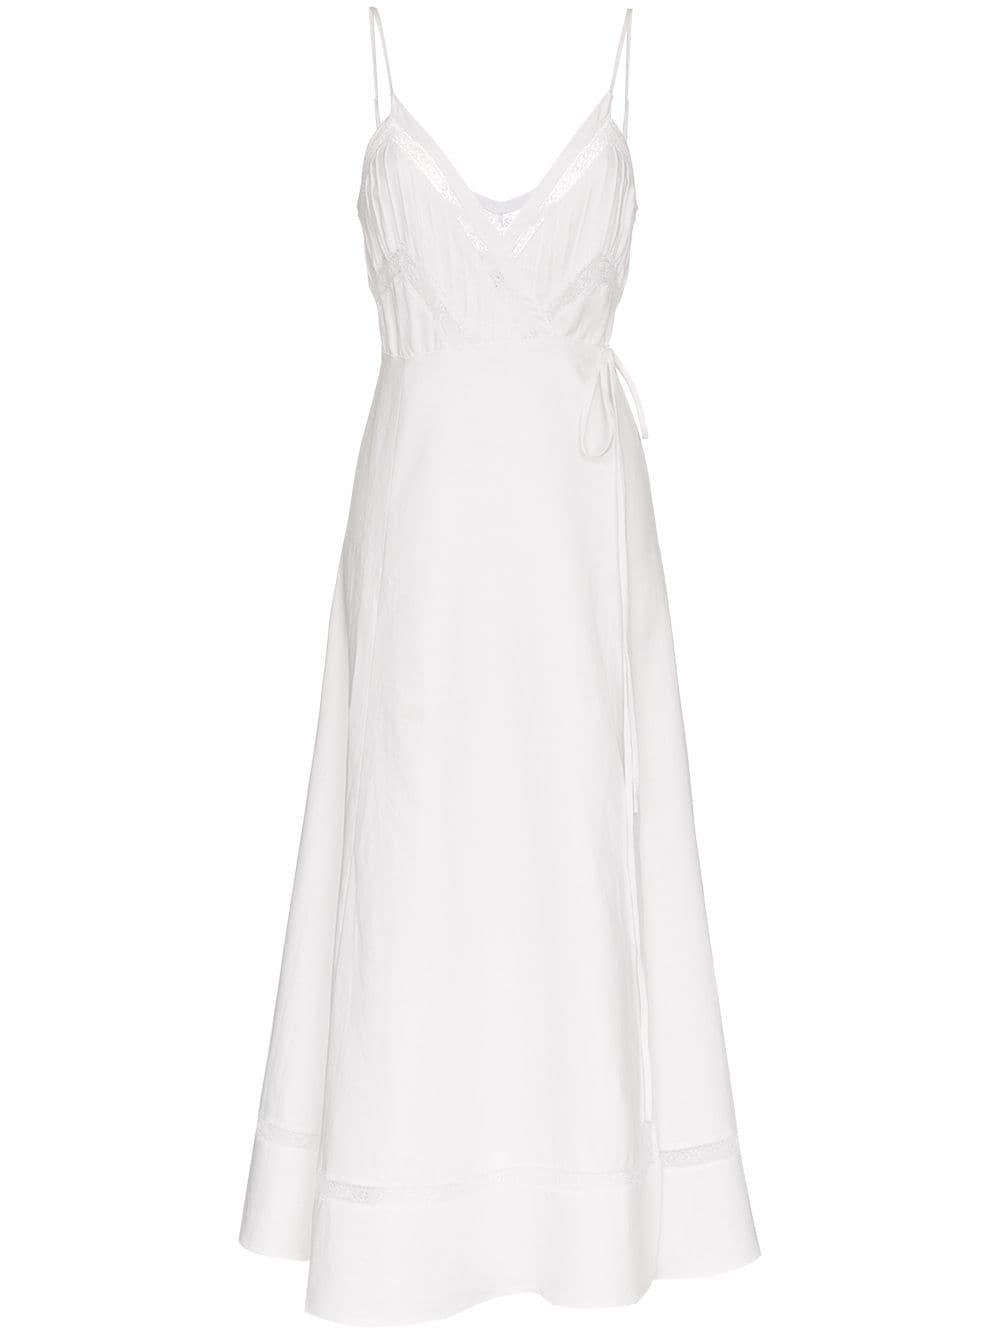 Reformation Daria Wrap Over Maxi Dress in White - Lyst